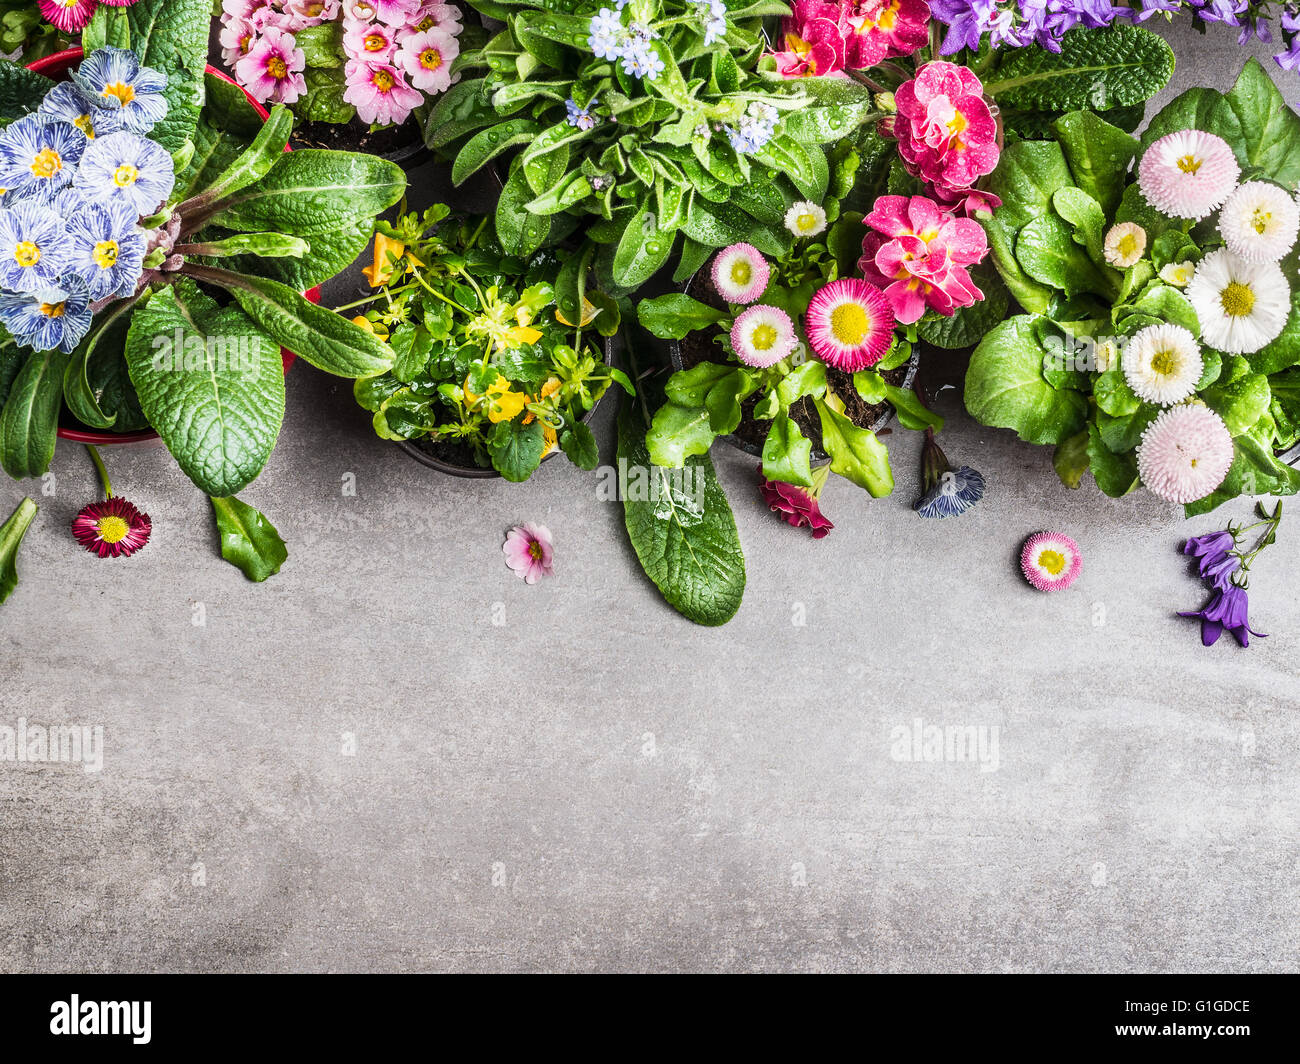 Various summer garden flowers in pots on gray stone concrete background, top view. Gardening or flowers decoration concept Stock Photo